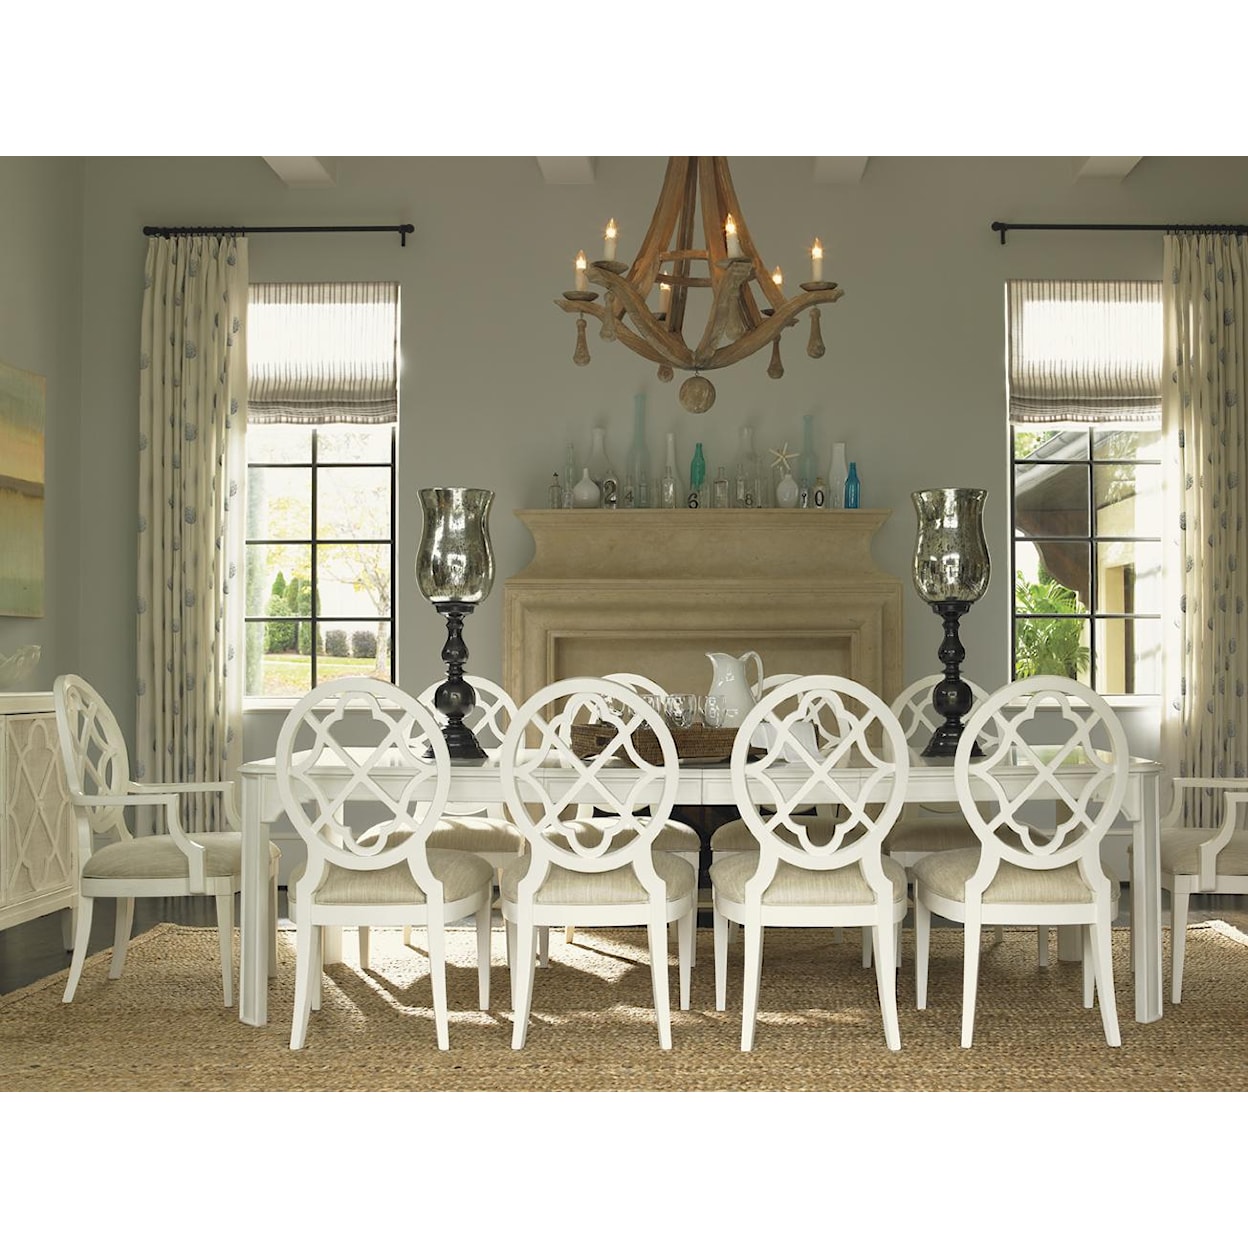 Tommy Bahama Home Ivory Key Castel Harbour Dining Table